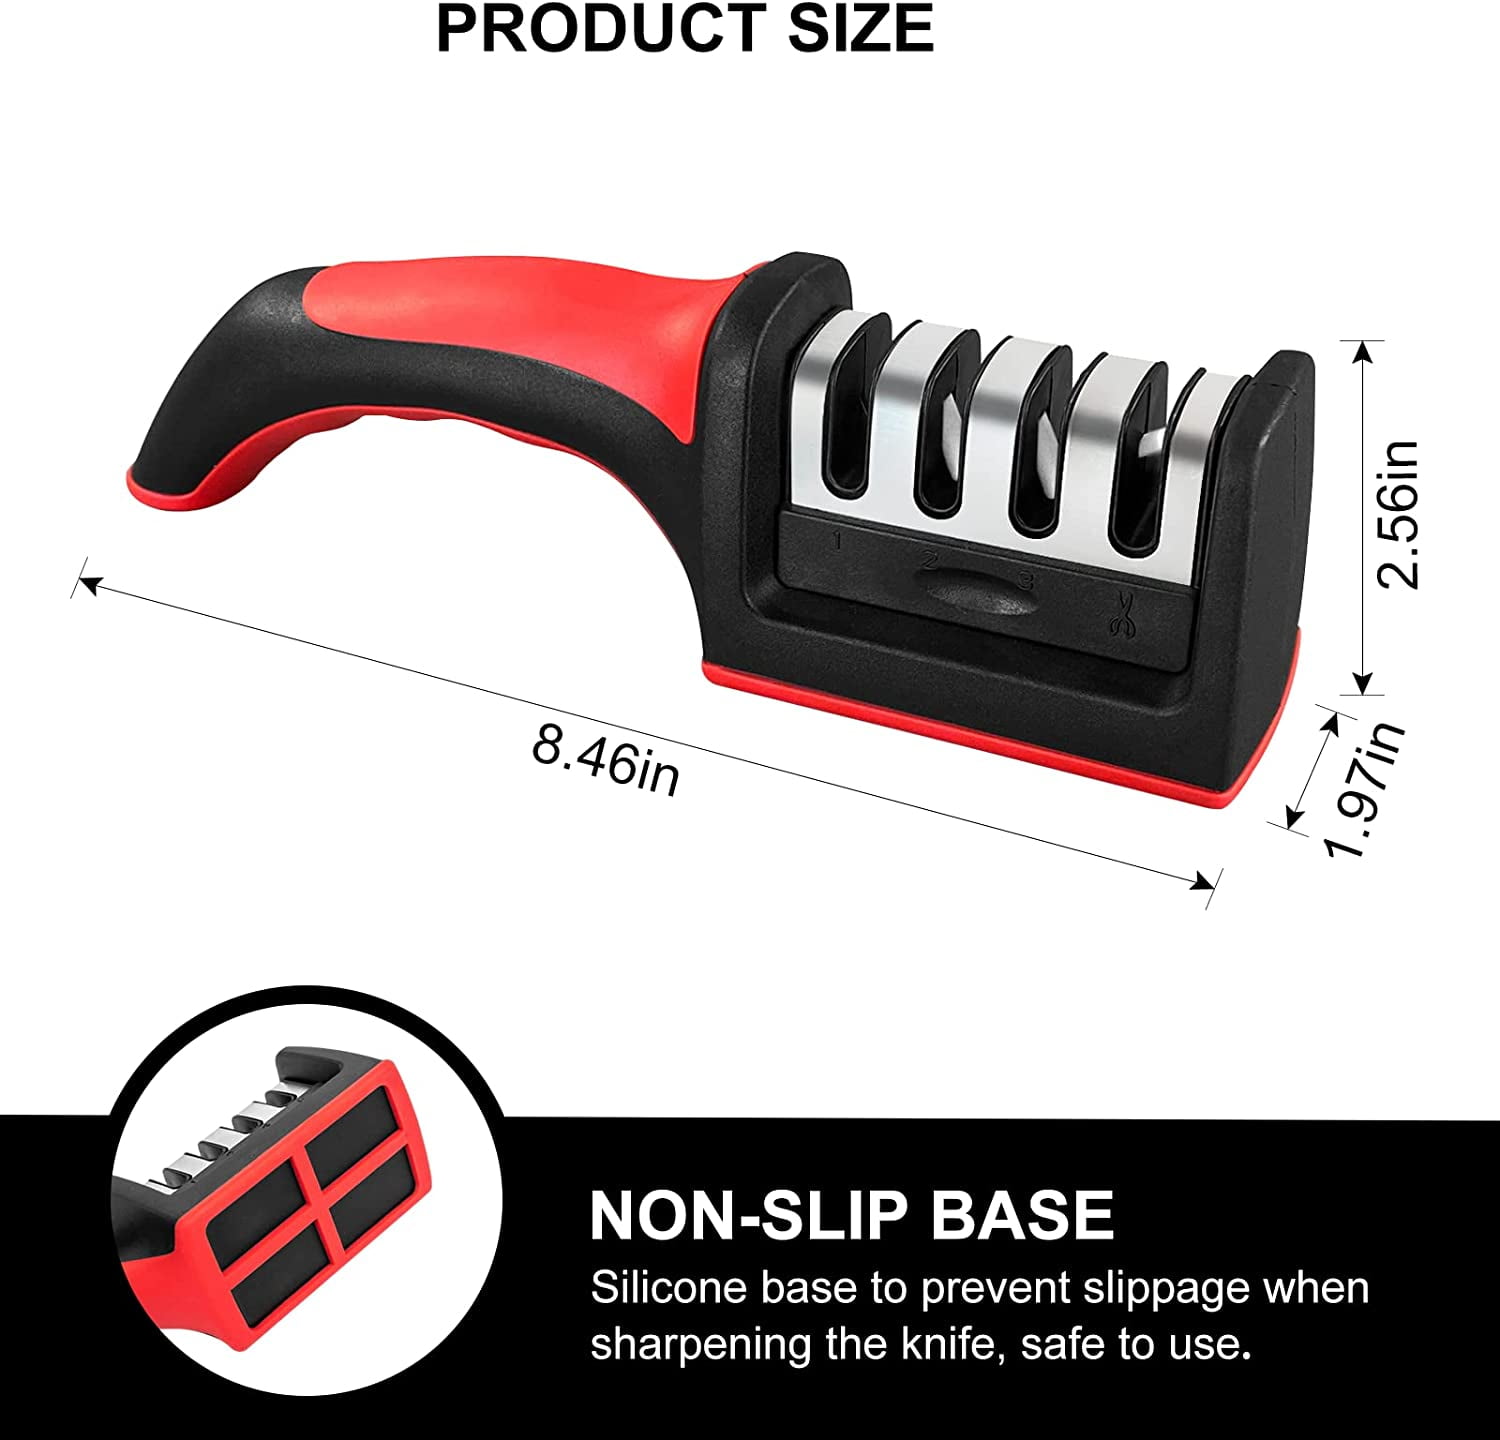 Tumbler Knife Sharpener: A Convenient Tool for Sharp and Efficient Blades